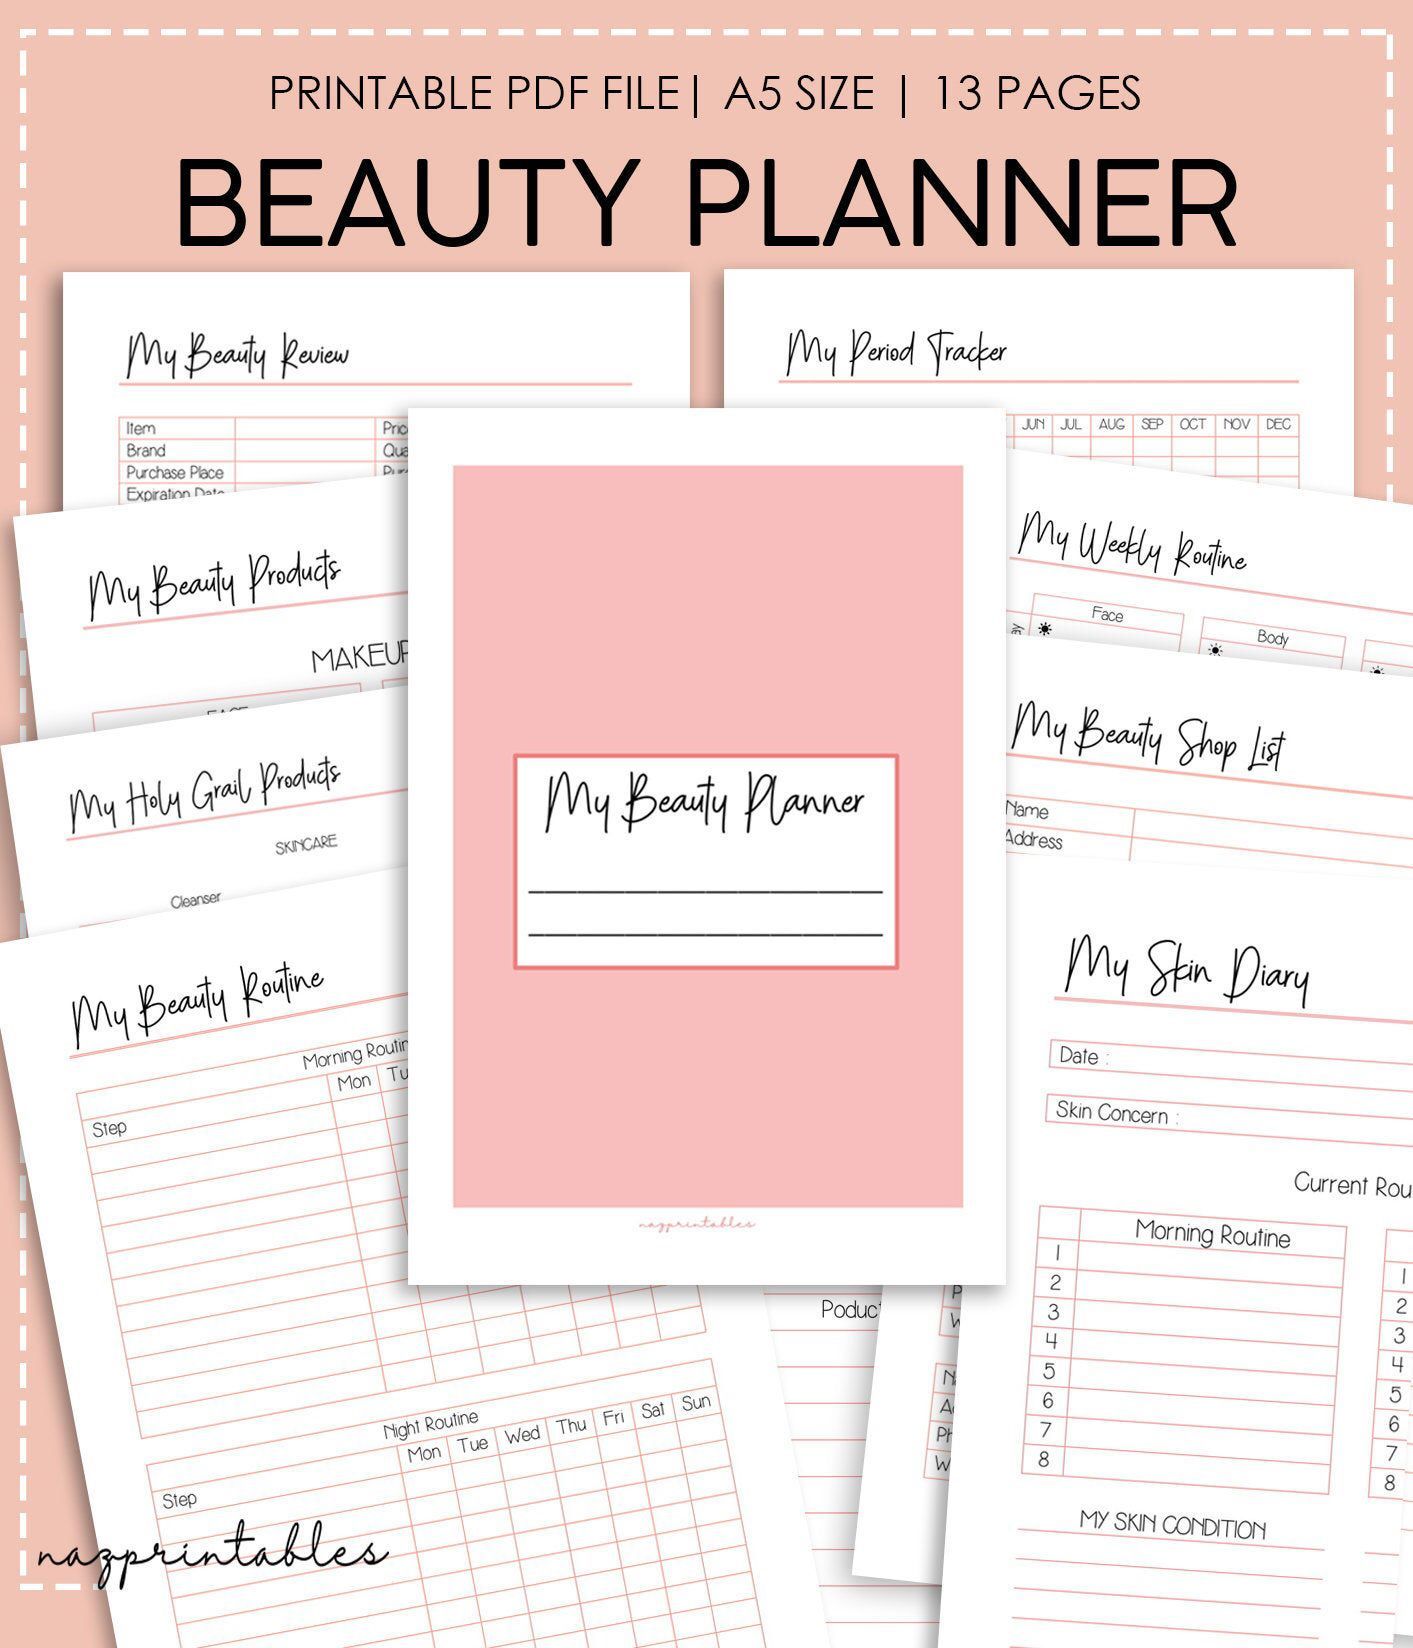 NEW Beauty Planner | Beauty Routine Tracker | Skincare Routine Tracker | Makeup Planner | Period Tracker| Printable Planner | A5 Size - NEW Beauty Planner | Beauty Routine Tracker | Skincare Routine Tracker | Makeup Planner | Period Tracker| Printable Planner | A5 Size -   18 beauty Routines checklist ideas